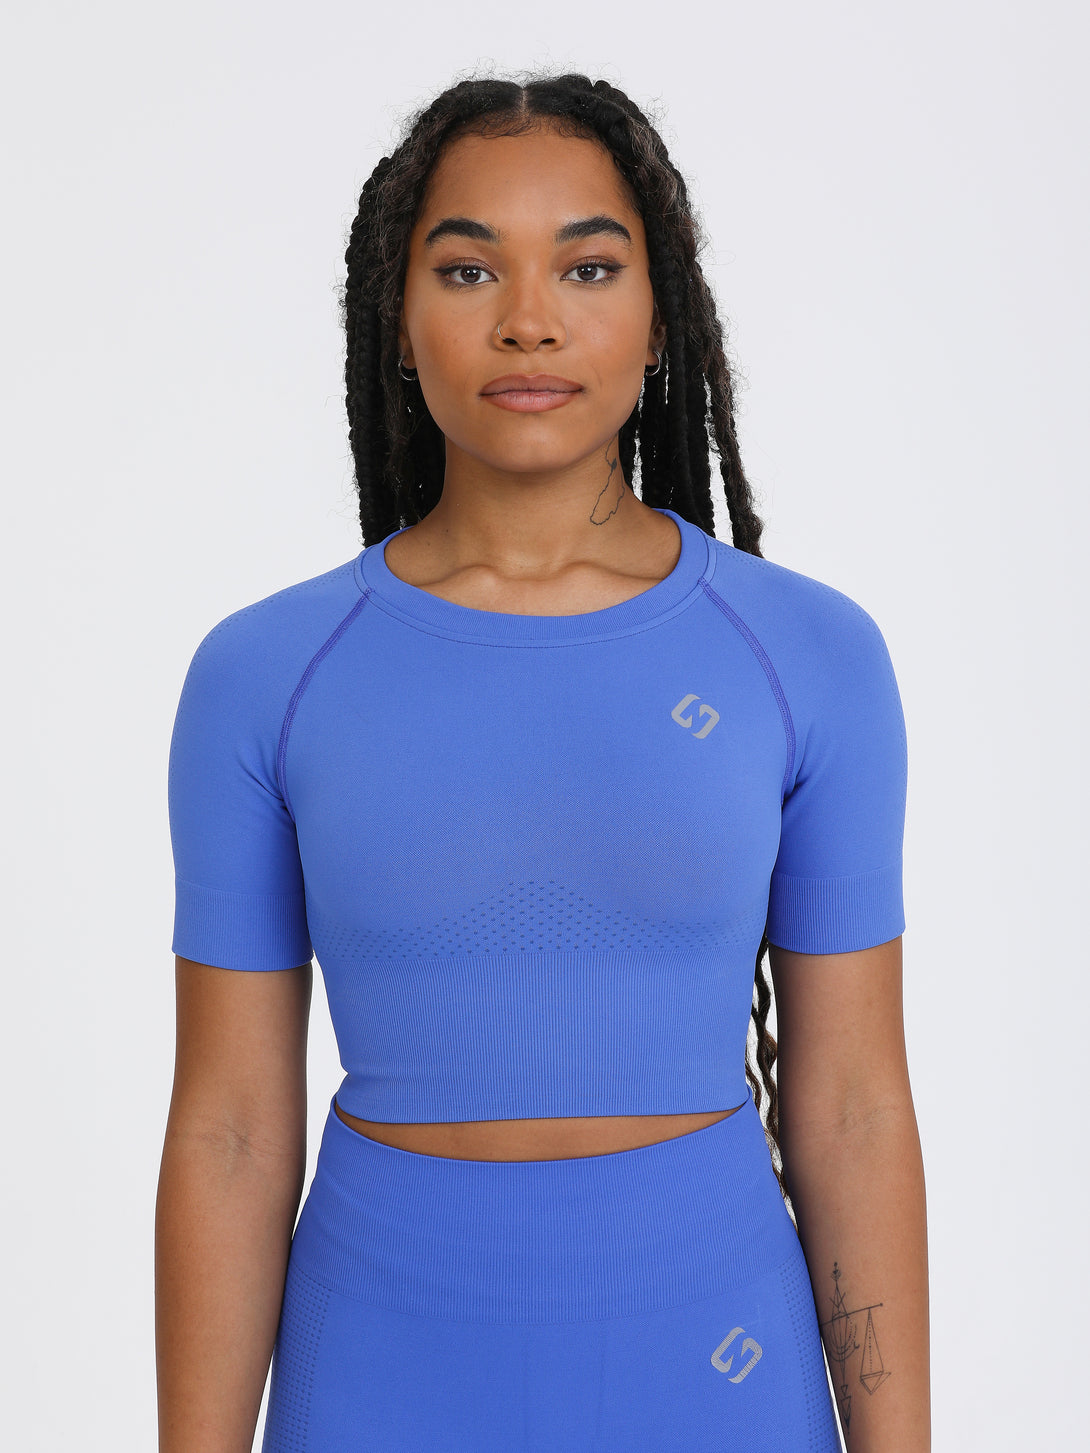 A Woman Wearing Amparo Blue Color The Main Short Sleeve Crop Top